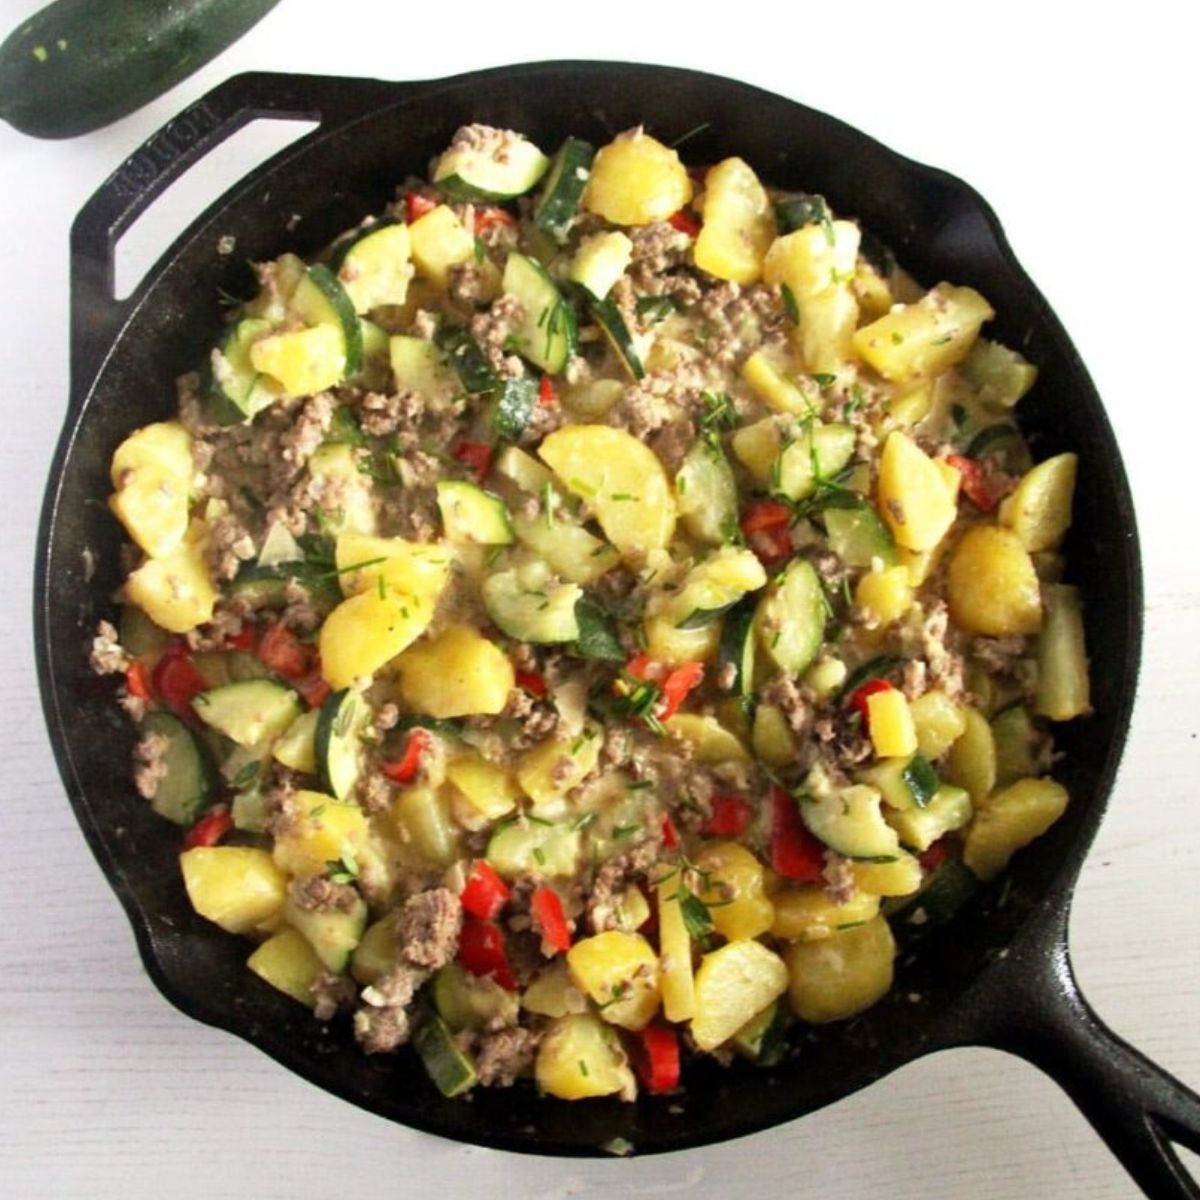 ground beef and zucchini cooked in a large cast iron skillet.